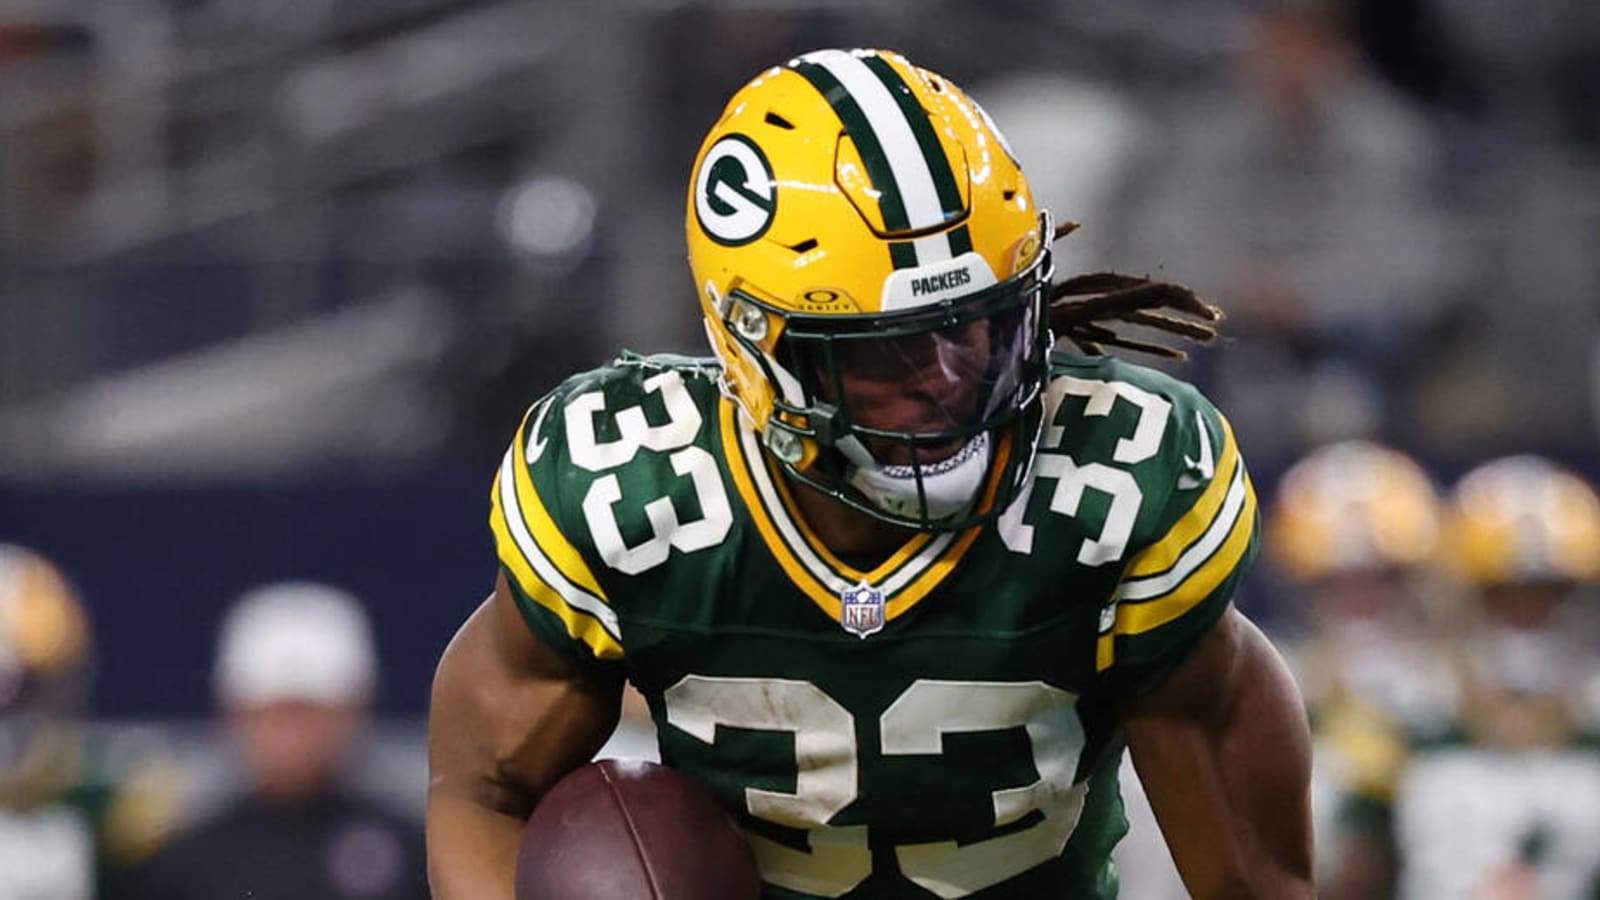 Watch: Packers' Jones rushes for third TD vs. Cowboys